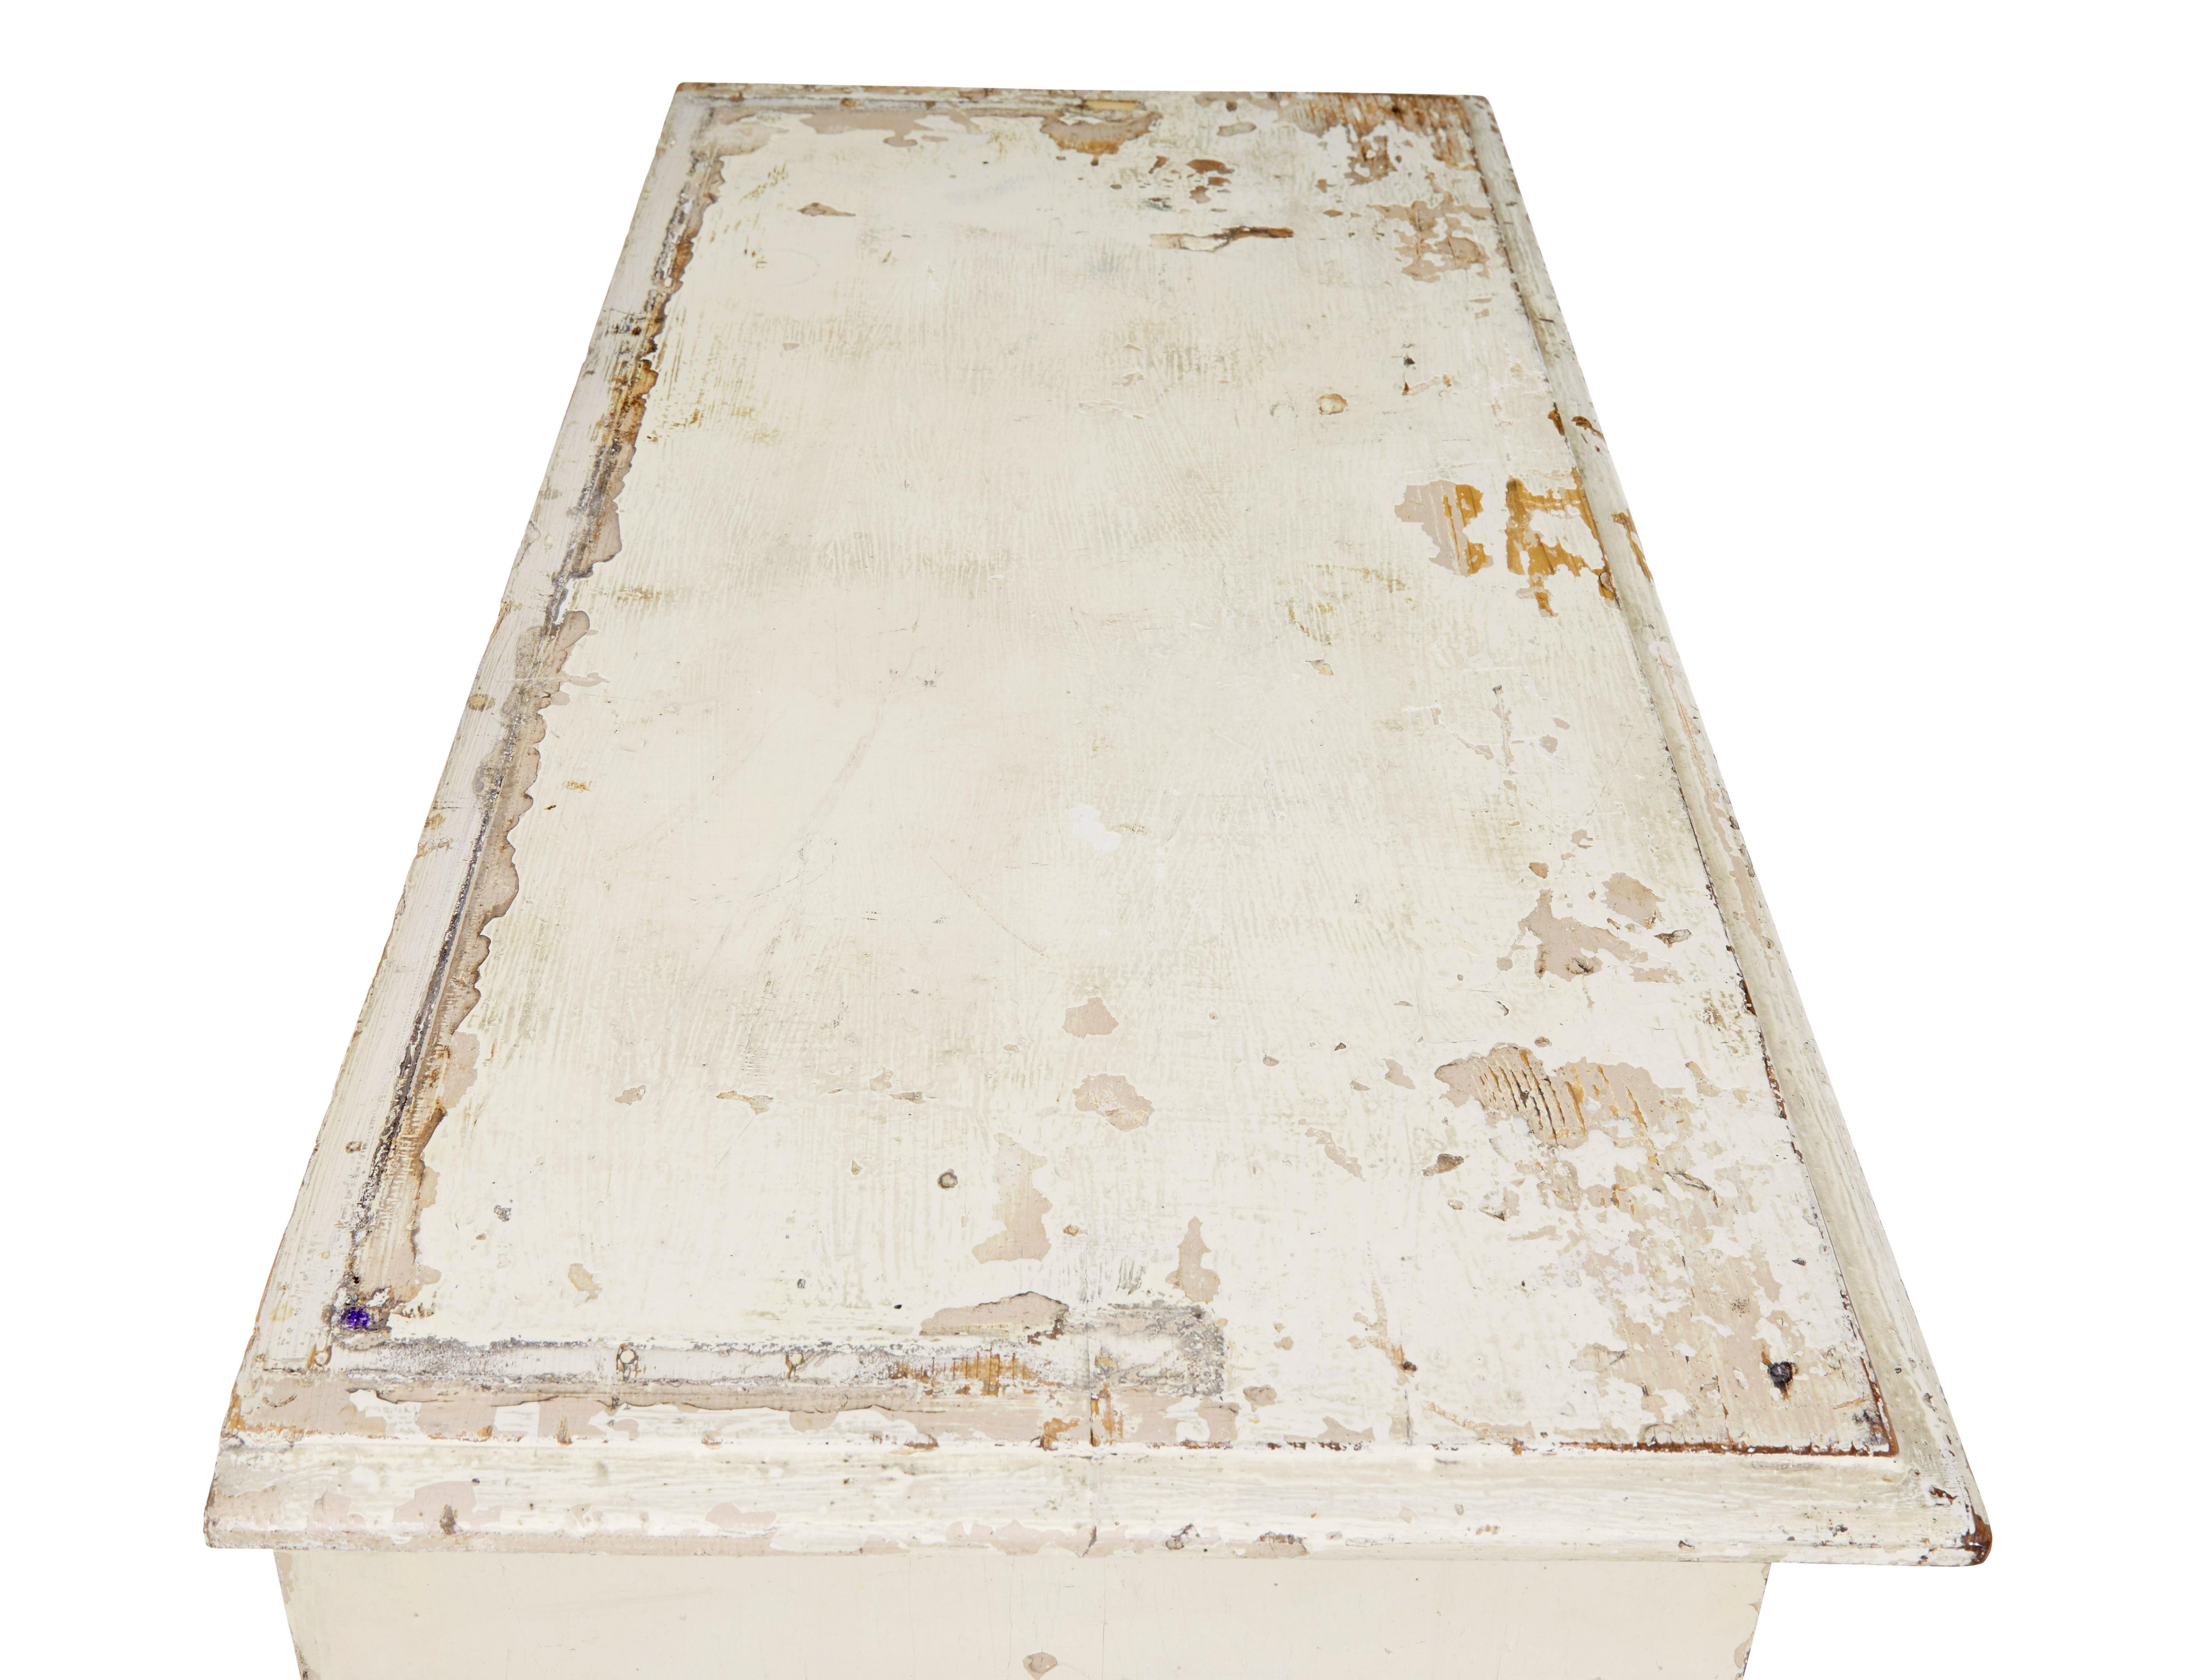 Rustic 19th century painted swedish pine dresser base circa 1880.

Here we offer a piece of rural traditional swedish furniture, ready for everyday use.

Original off white and wheat painted colour scheme.  2 deep drawers below the top surface with